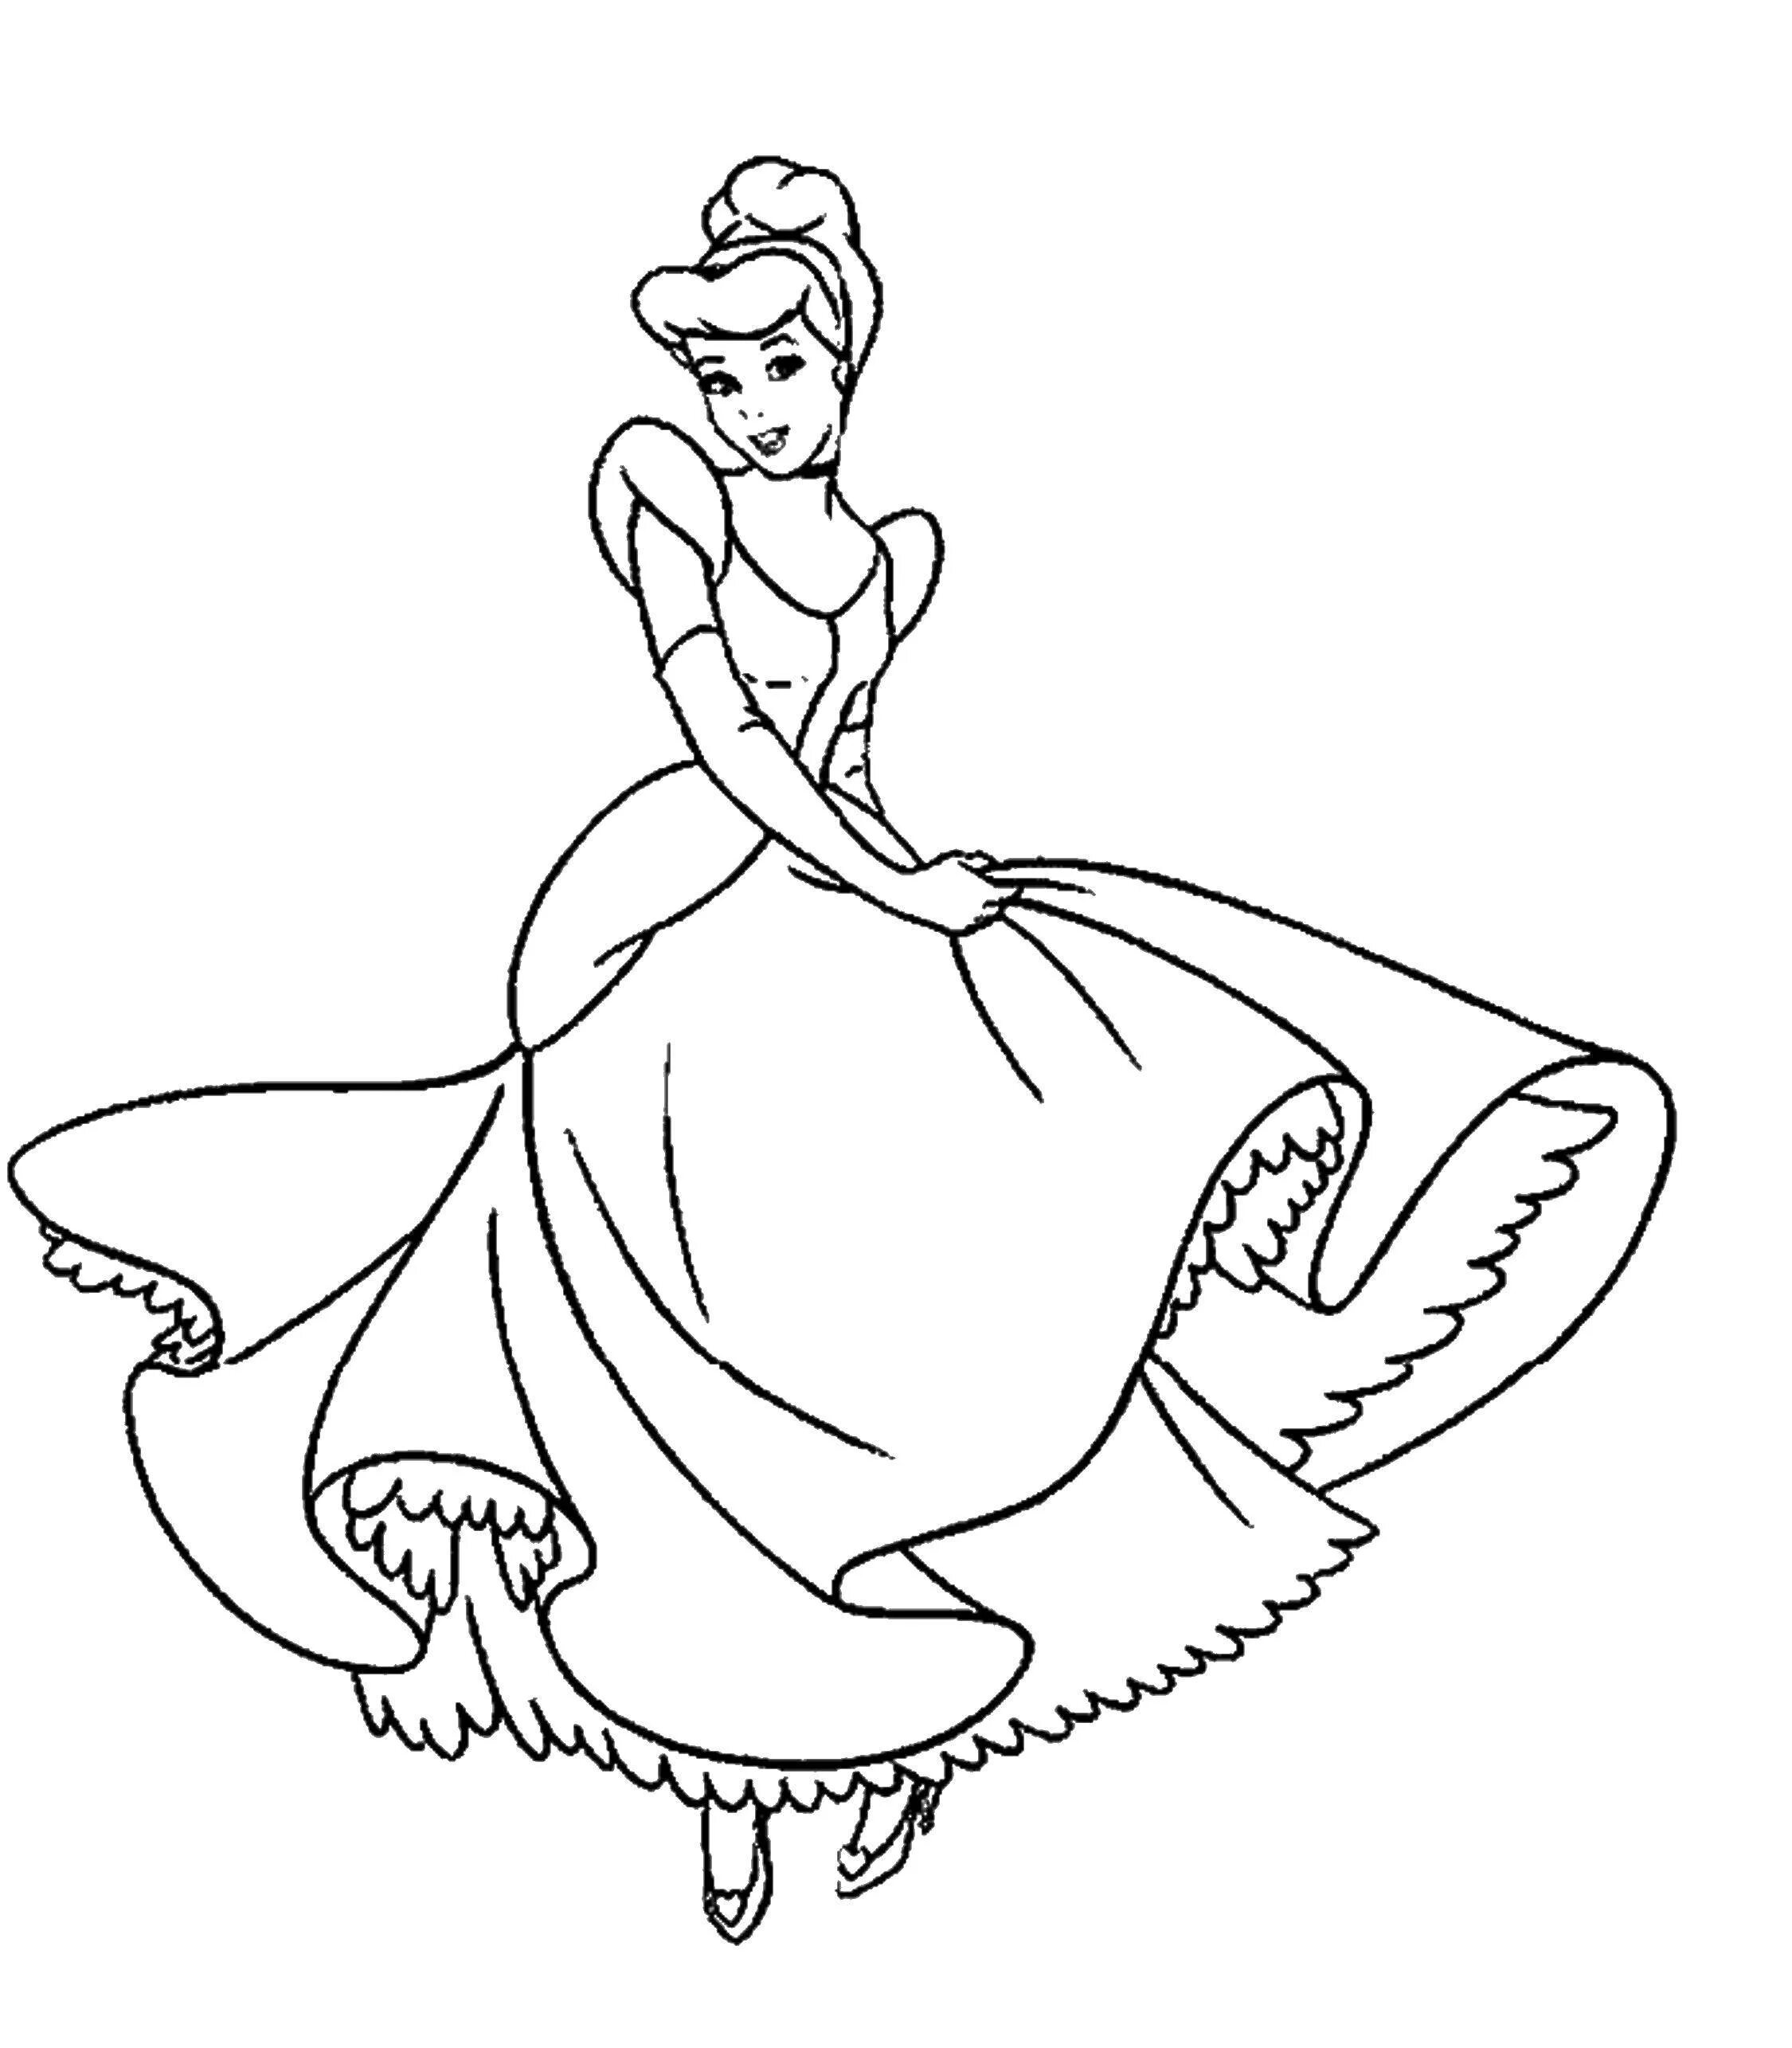 Glowing Cinderella Coloring Page for Toddlers